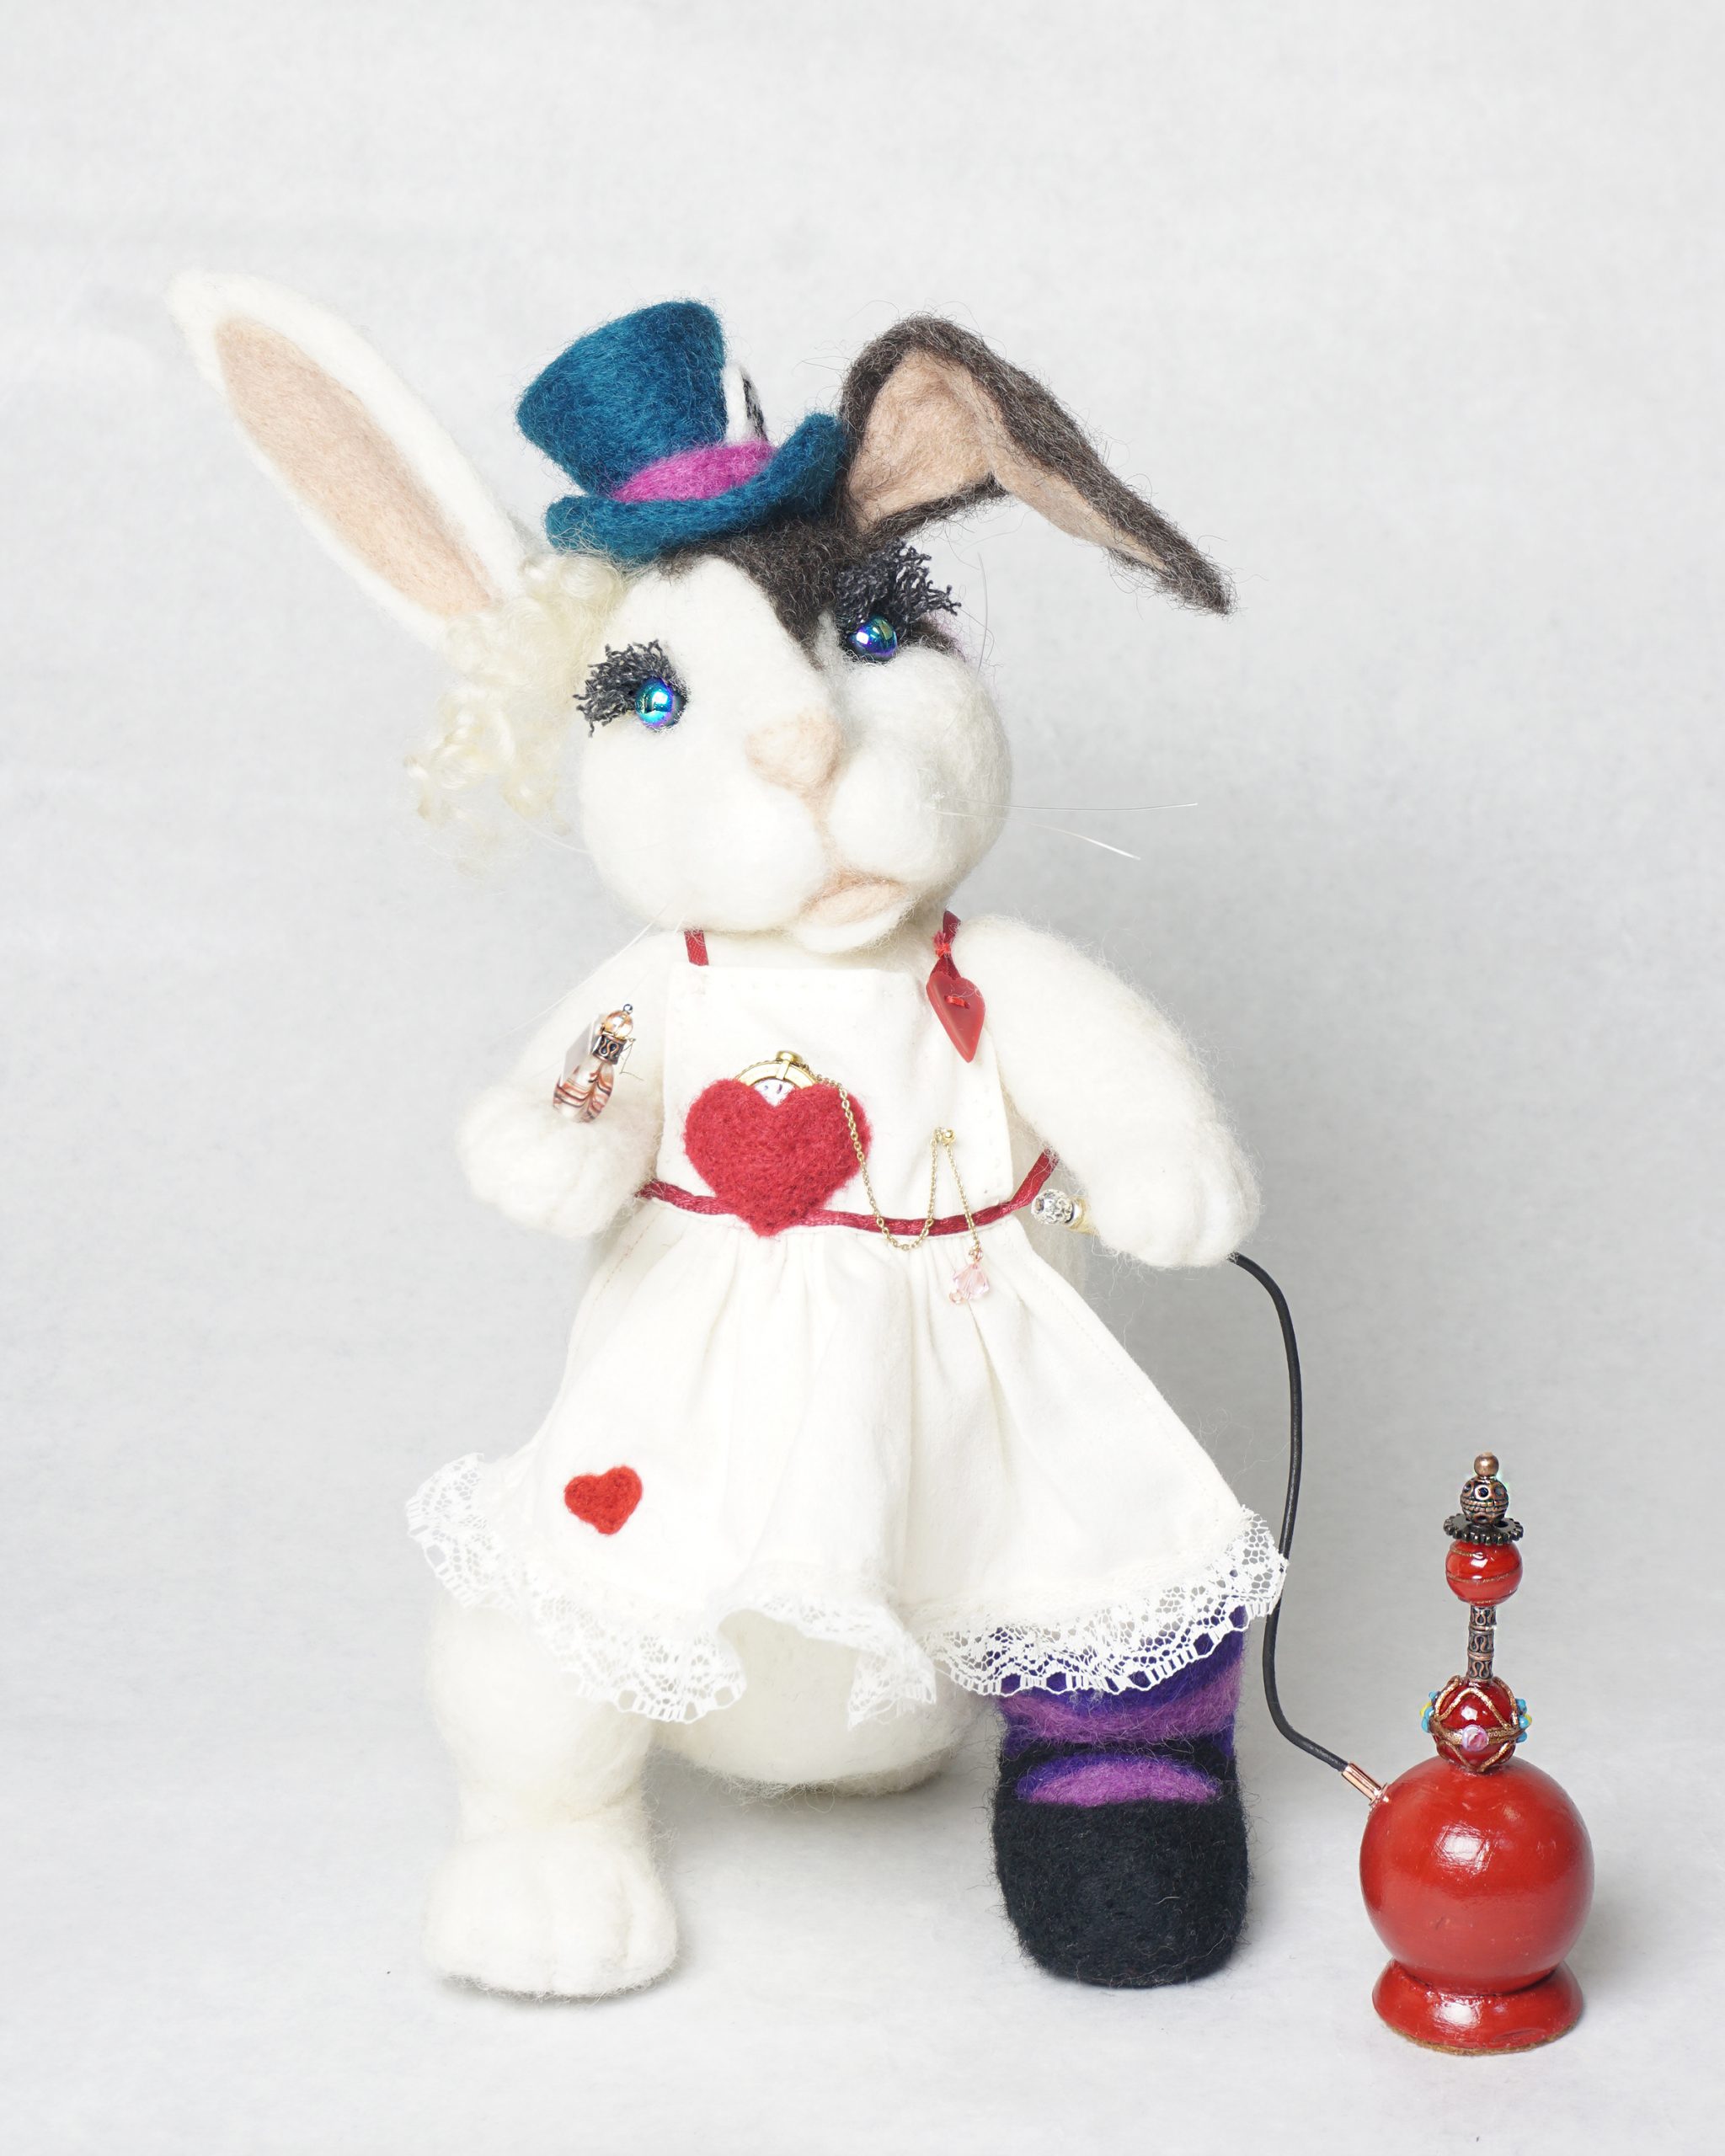 Through The Looking Glass One Too Many Times - anthropomorphic rabbit needle felted art doll sculpture Alice in Wonderland character mashup